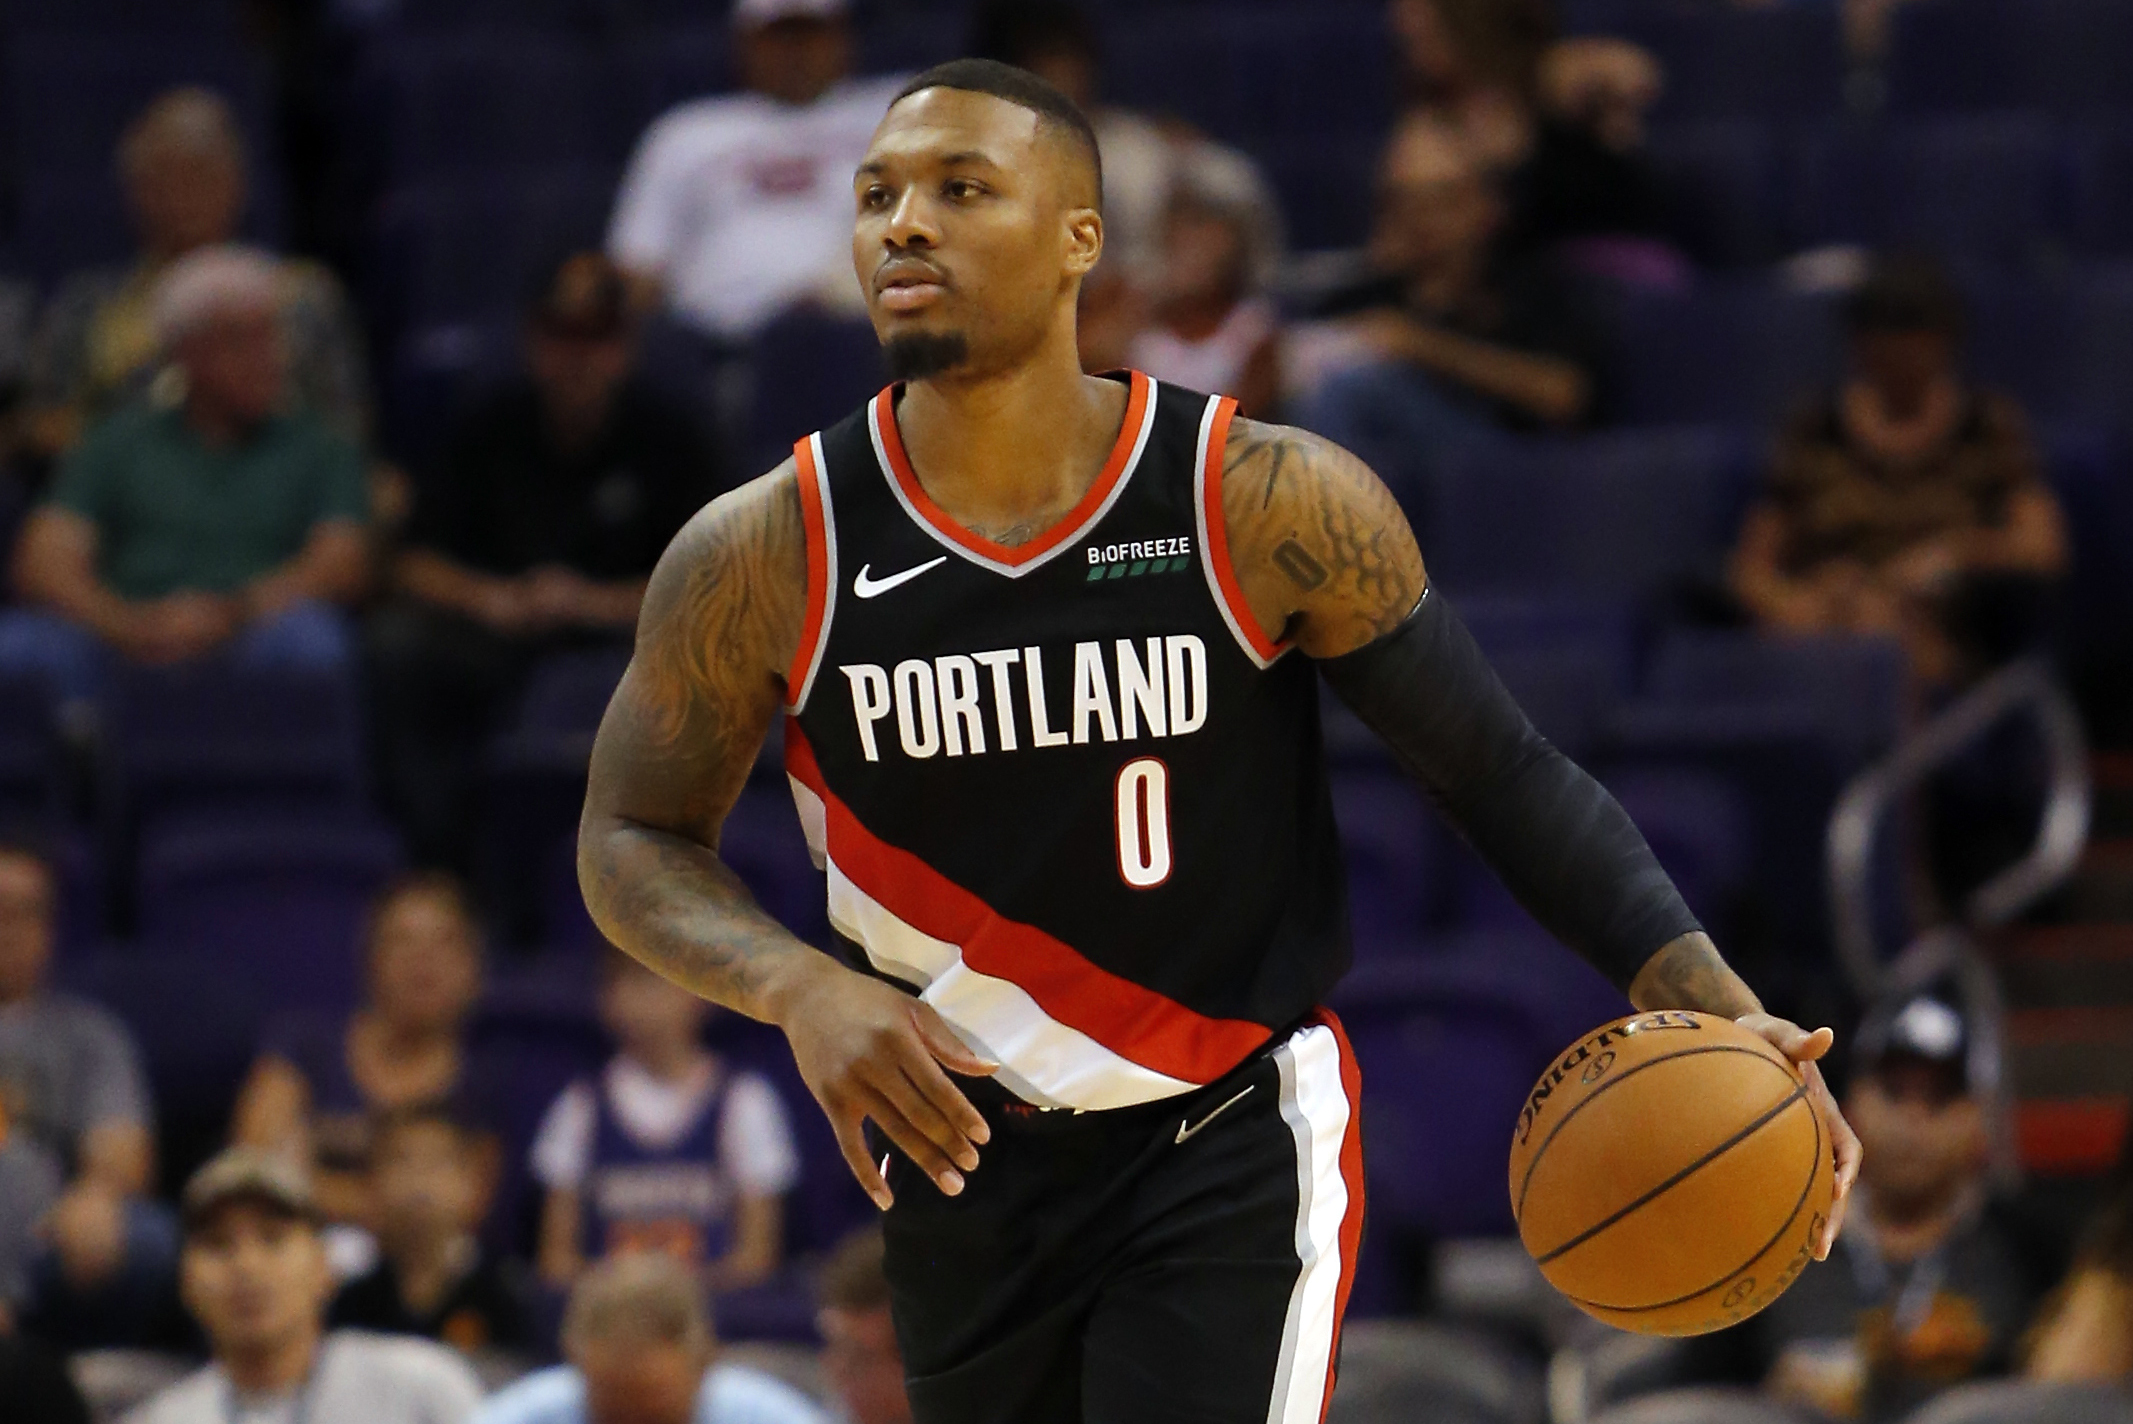 Trail Blazers jerseys will get 'Biofreeze' logo patches after new